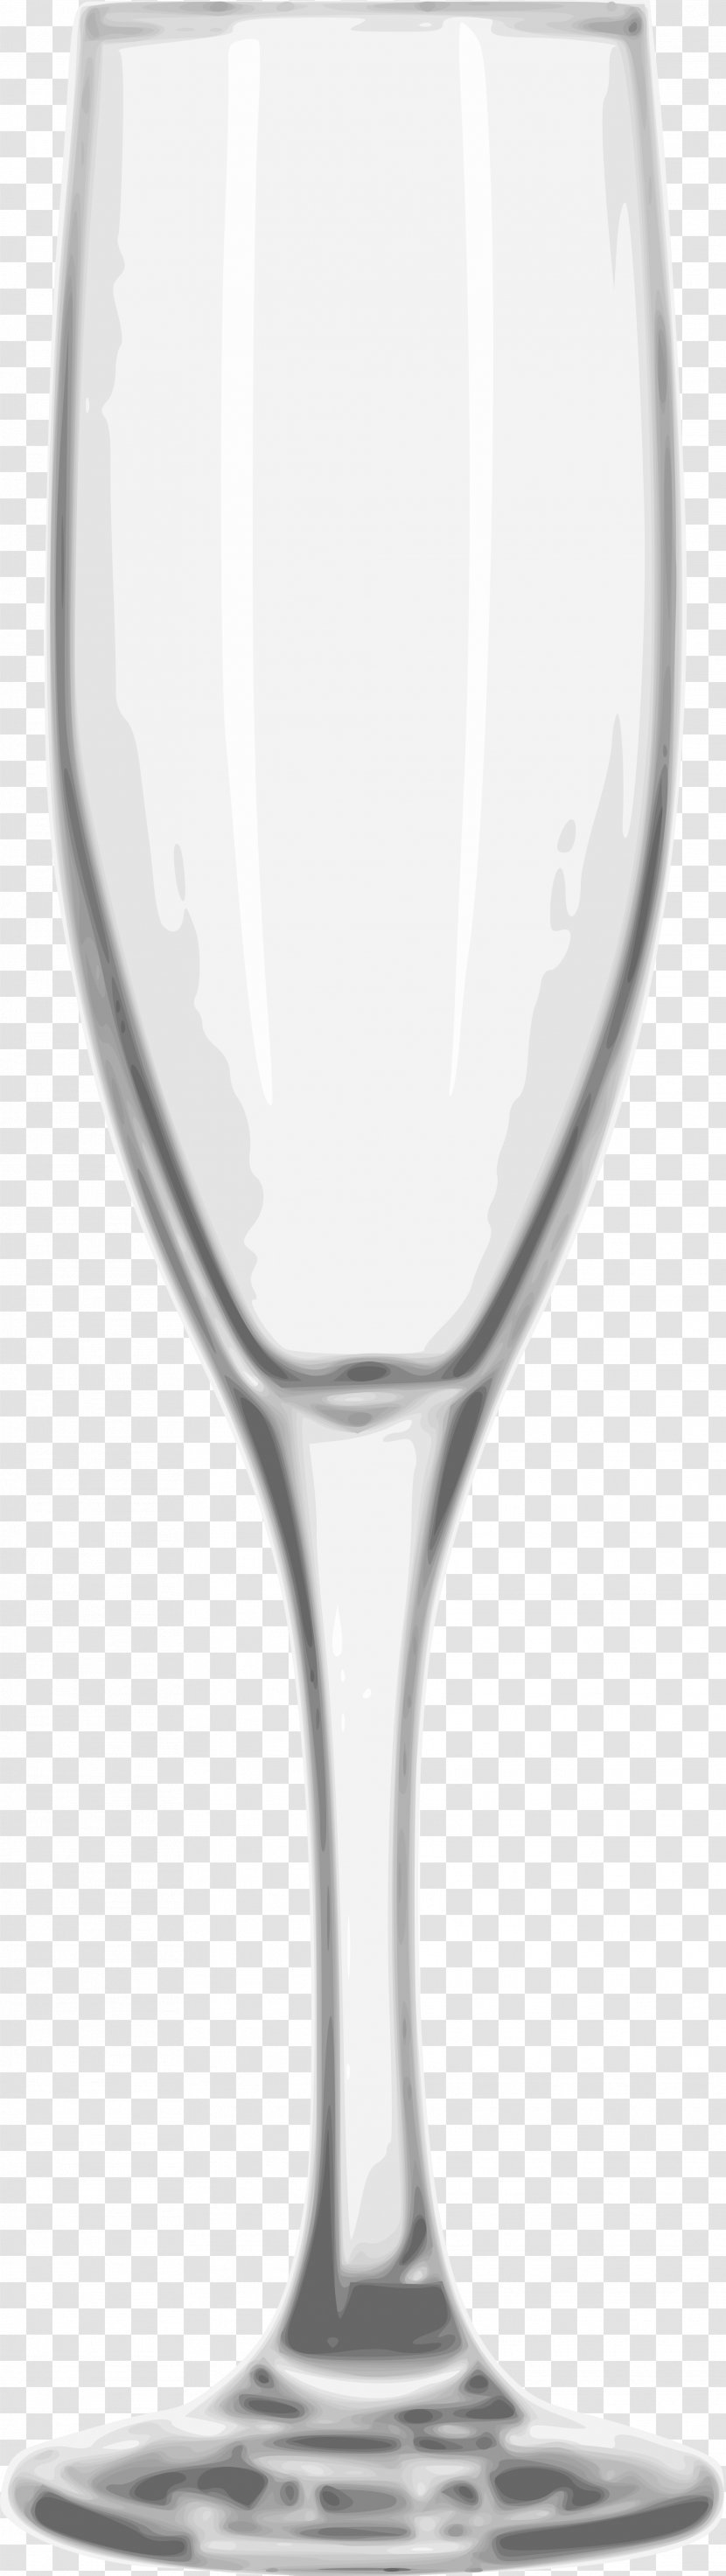 Wine Glass Champagne - Tableware - Wineglass Transparent PNG